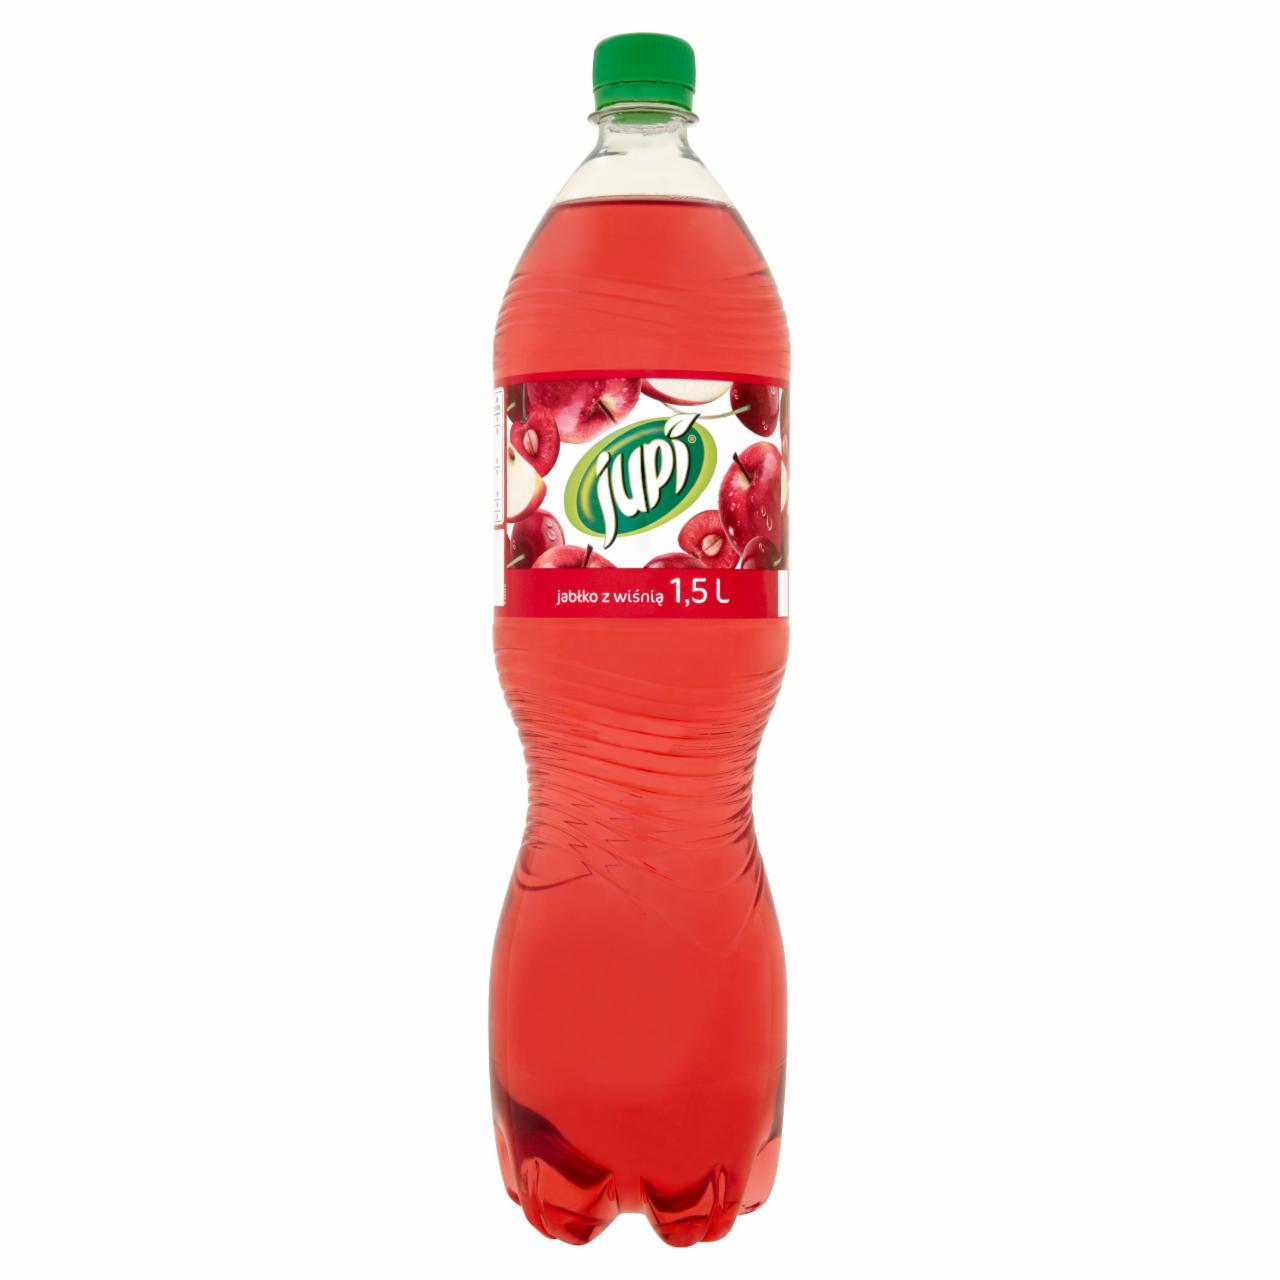 Photo - Jupi Apple and Cherry Flavoured Drink 1.5 L